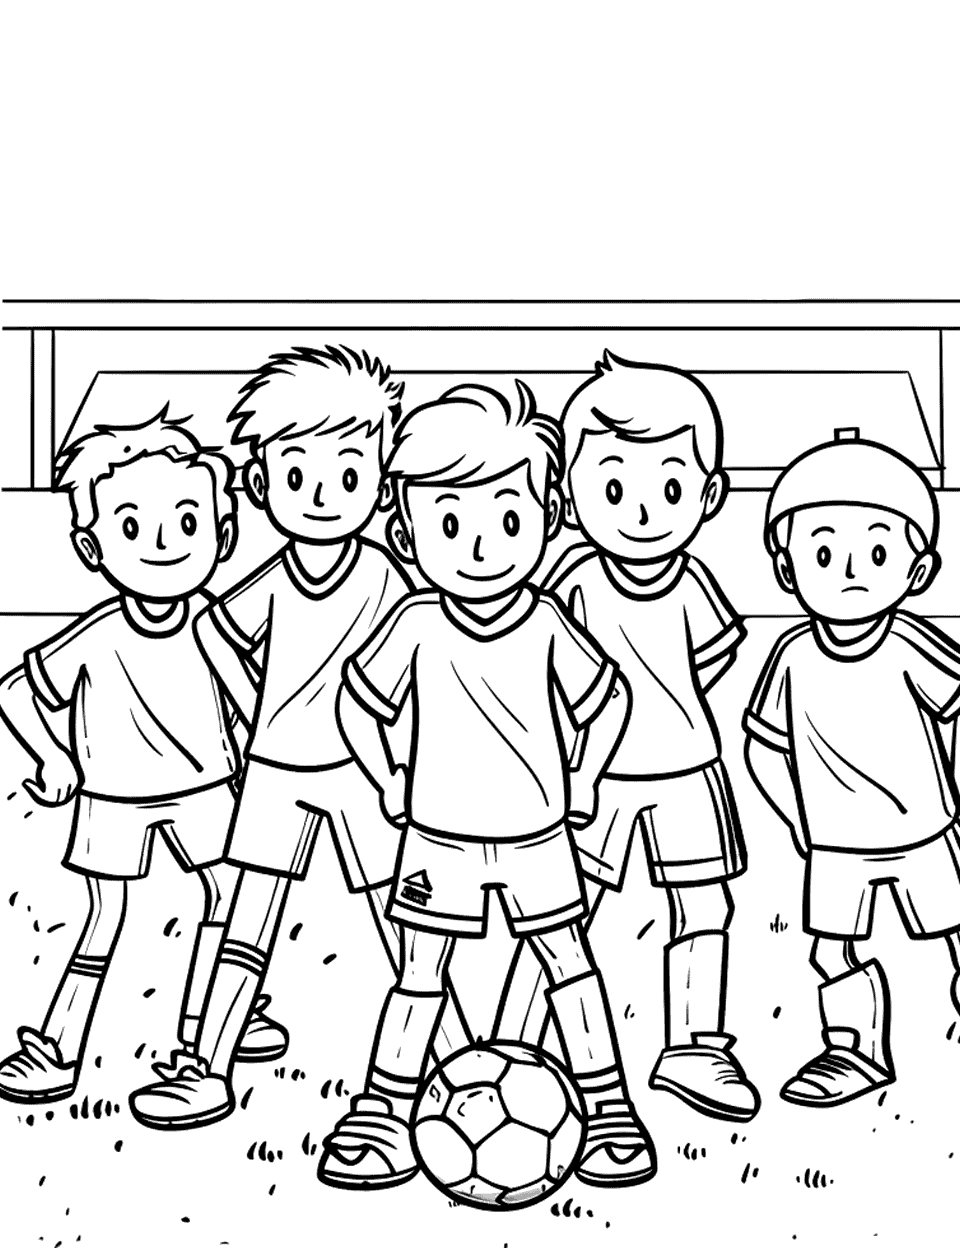 Team Photo Soccer Coloring Page - The team posing for a team photo on the field with the stadium in the background.